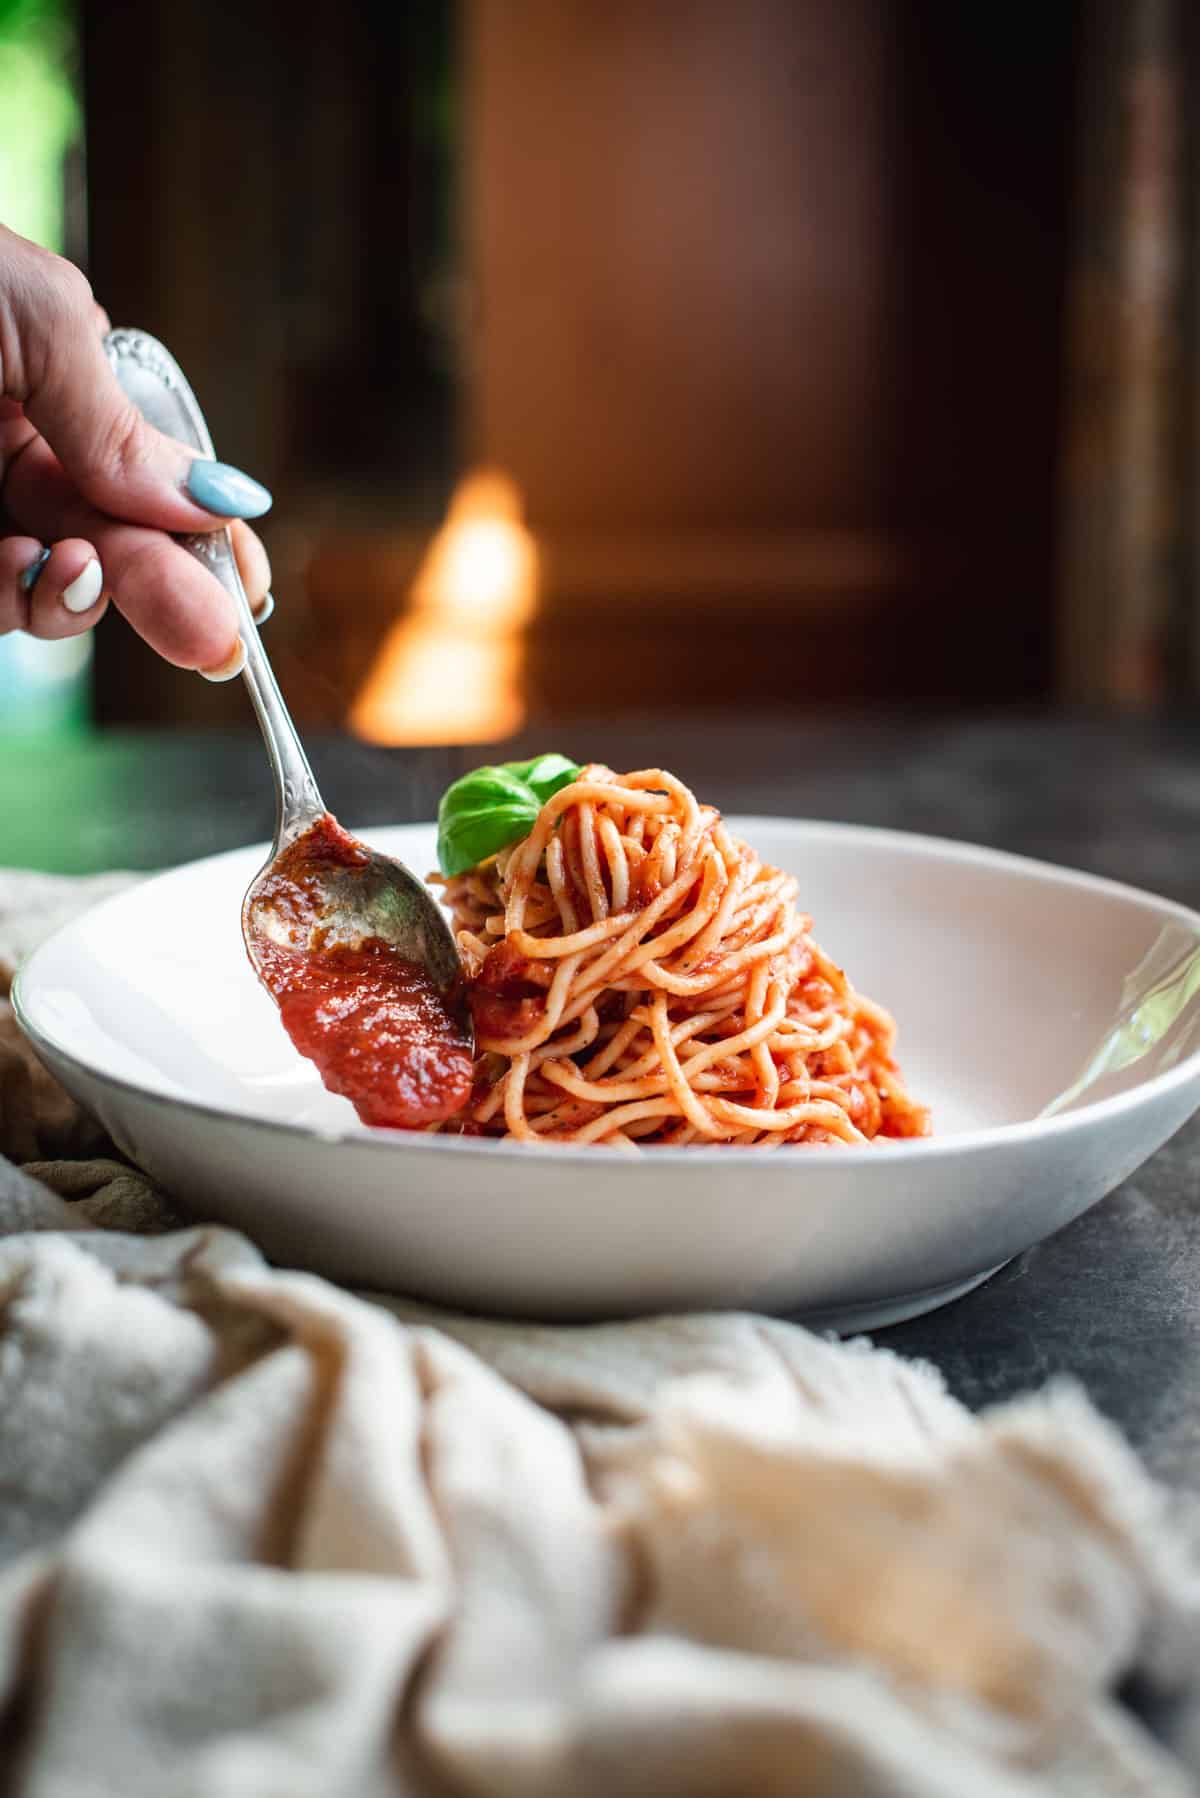 A hand holding a silver spoon is placing  easy homemade pasta sauce over spaghetti in a white bowl. It is garnished with a basil leaf and sitting on a grey counter.